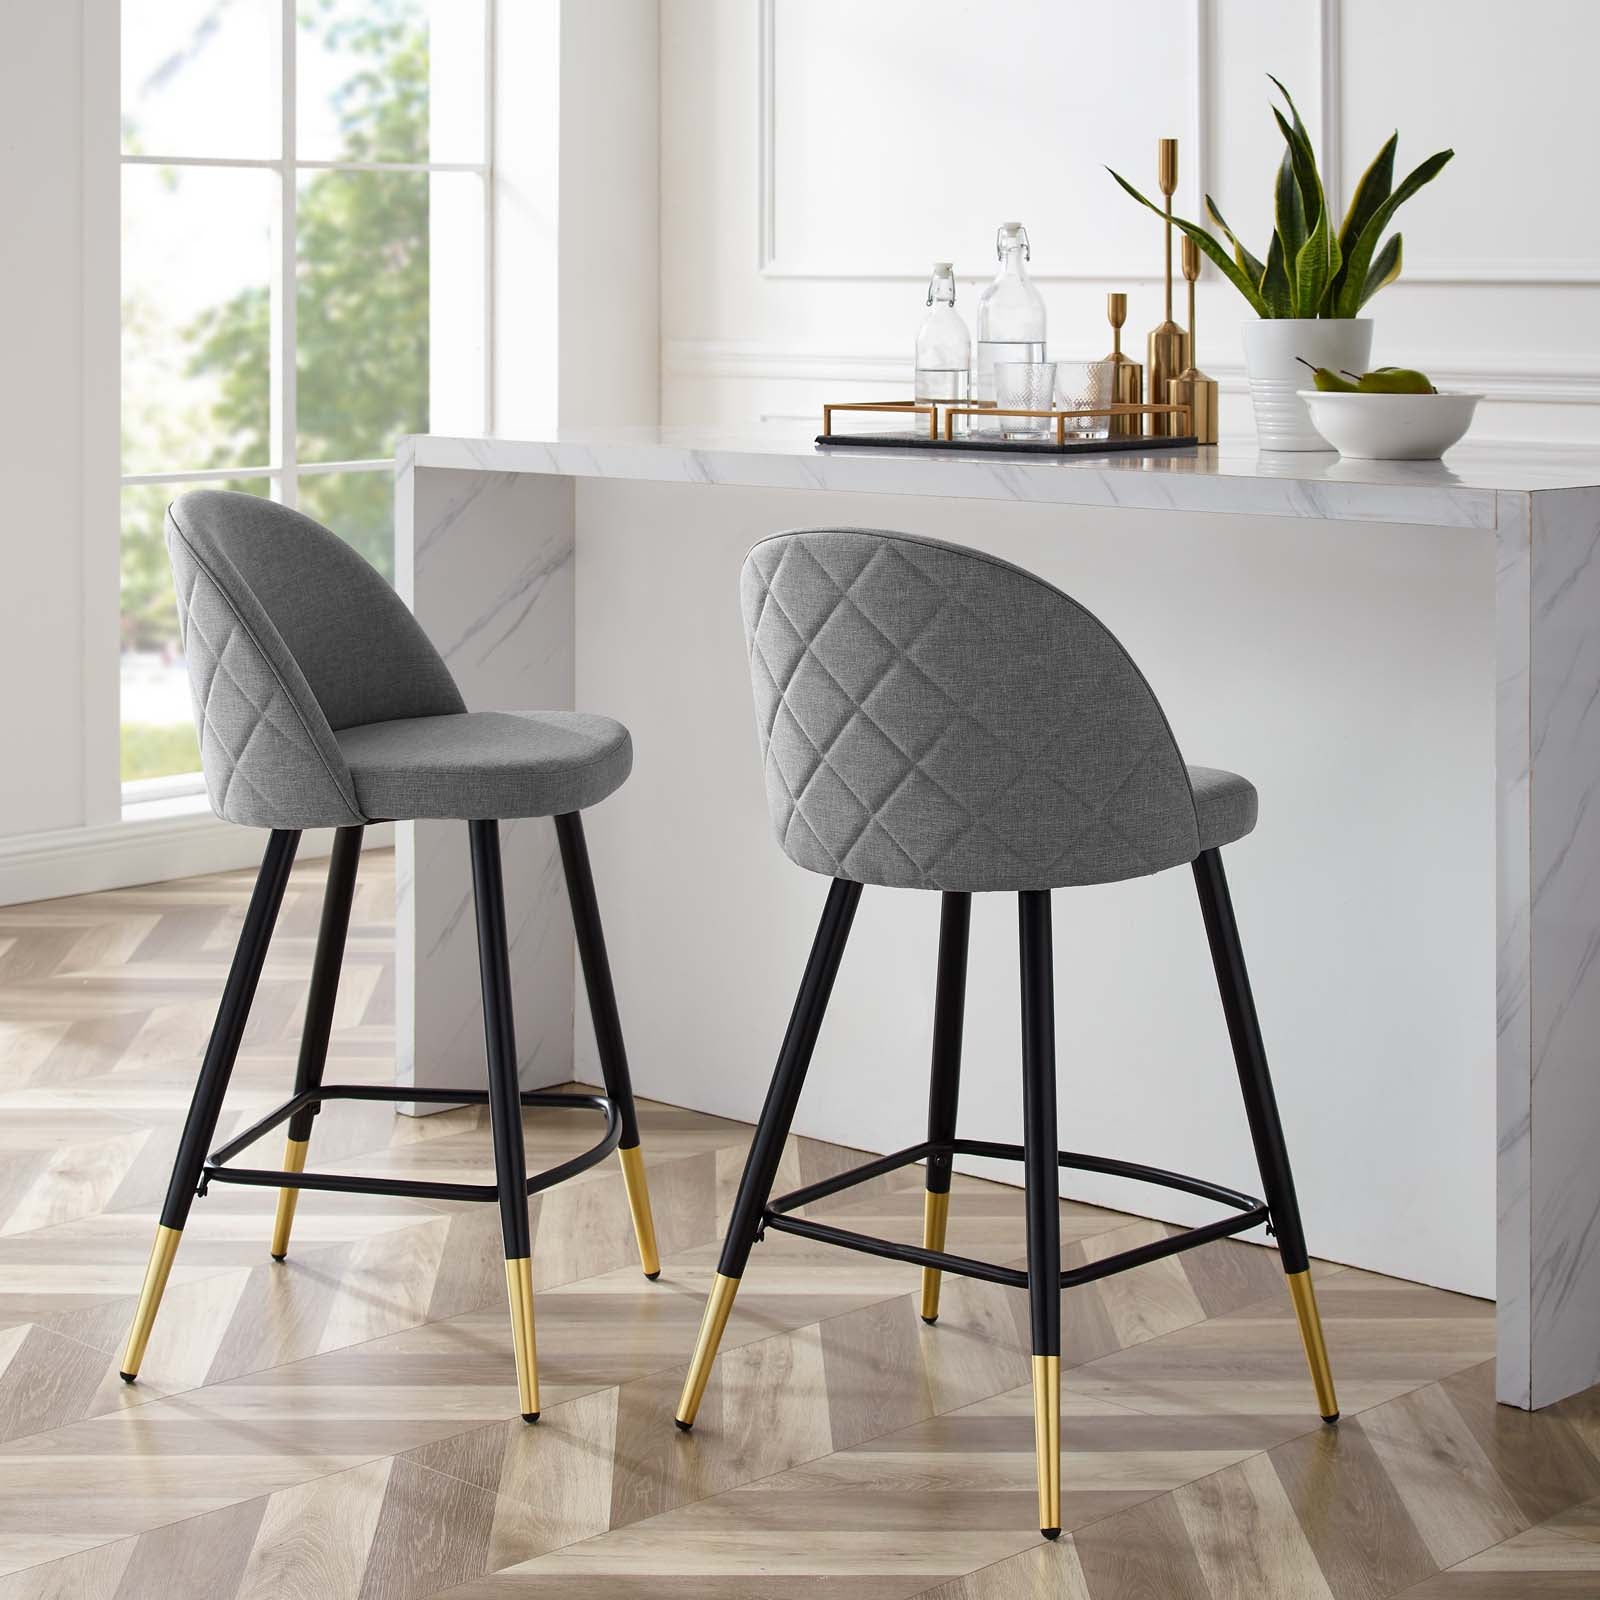 Modway Barstools - Cordial Fabric Counter Stools - ( Set of 2 ) Light Gray